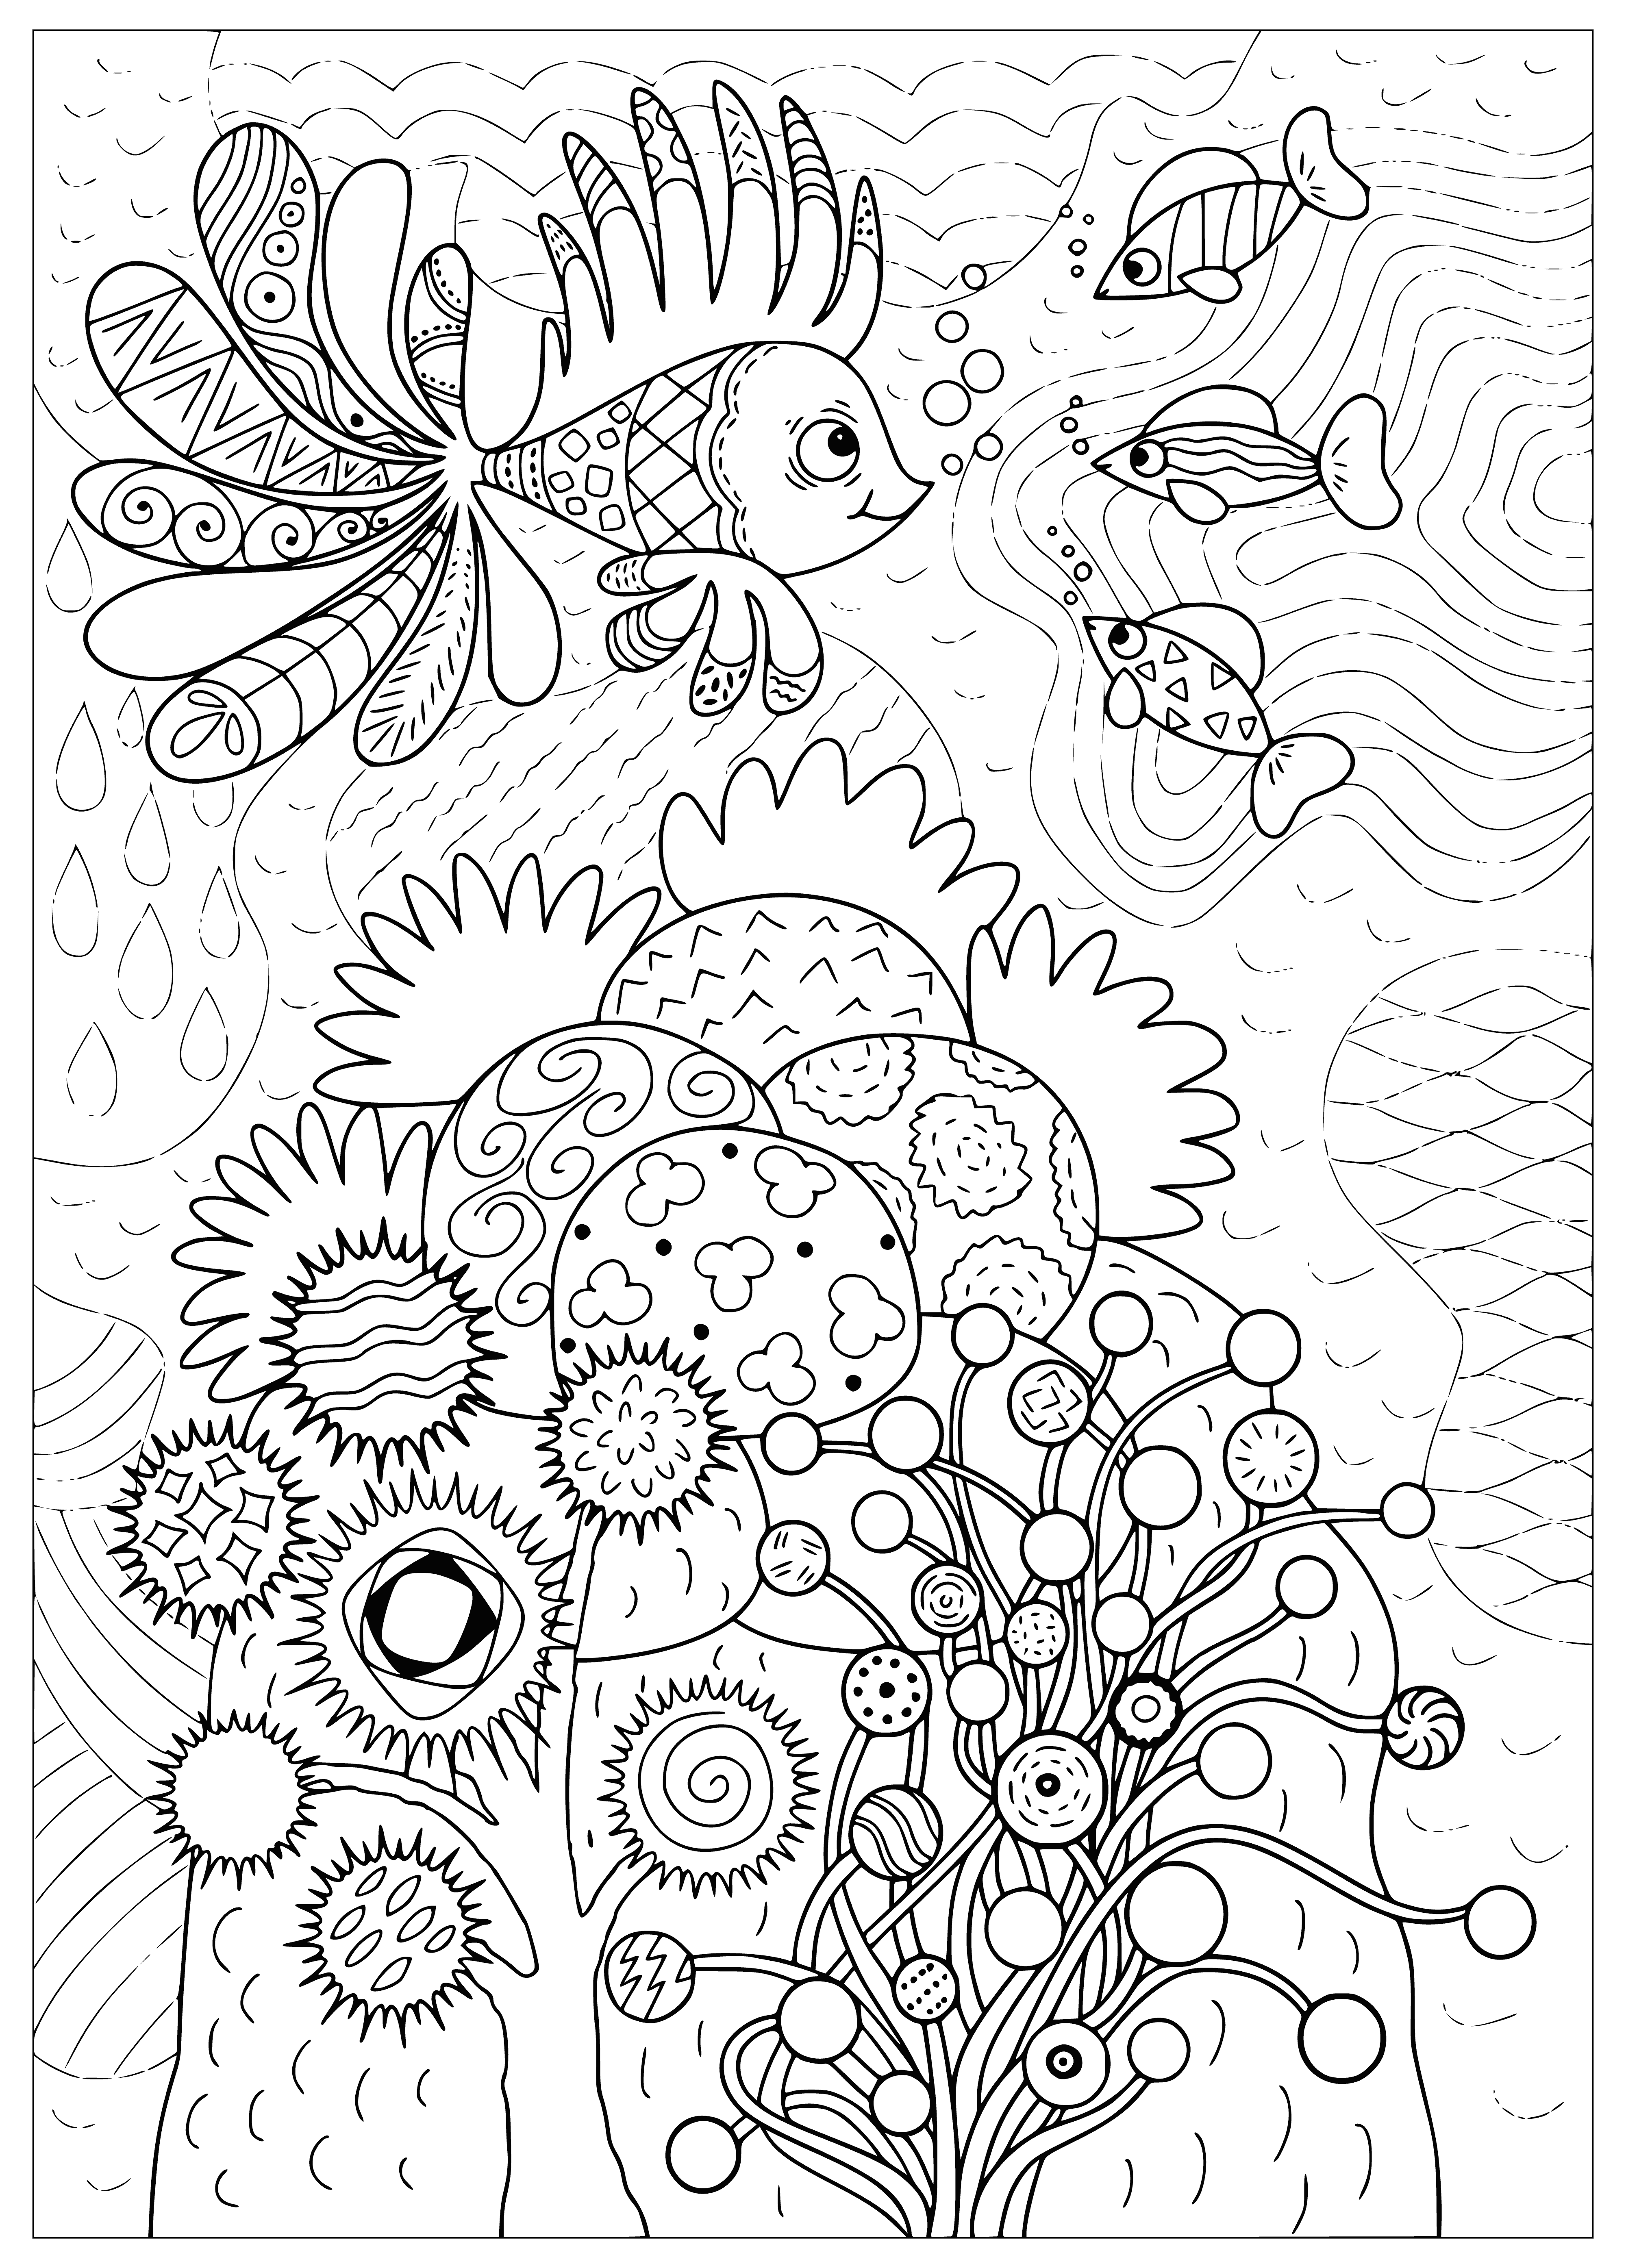 coloring page: School of small blue fish glide through the water in formation, surrounded by colorful schools in the distance. Sun sparkles on their scales.